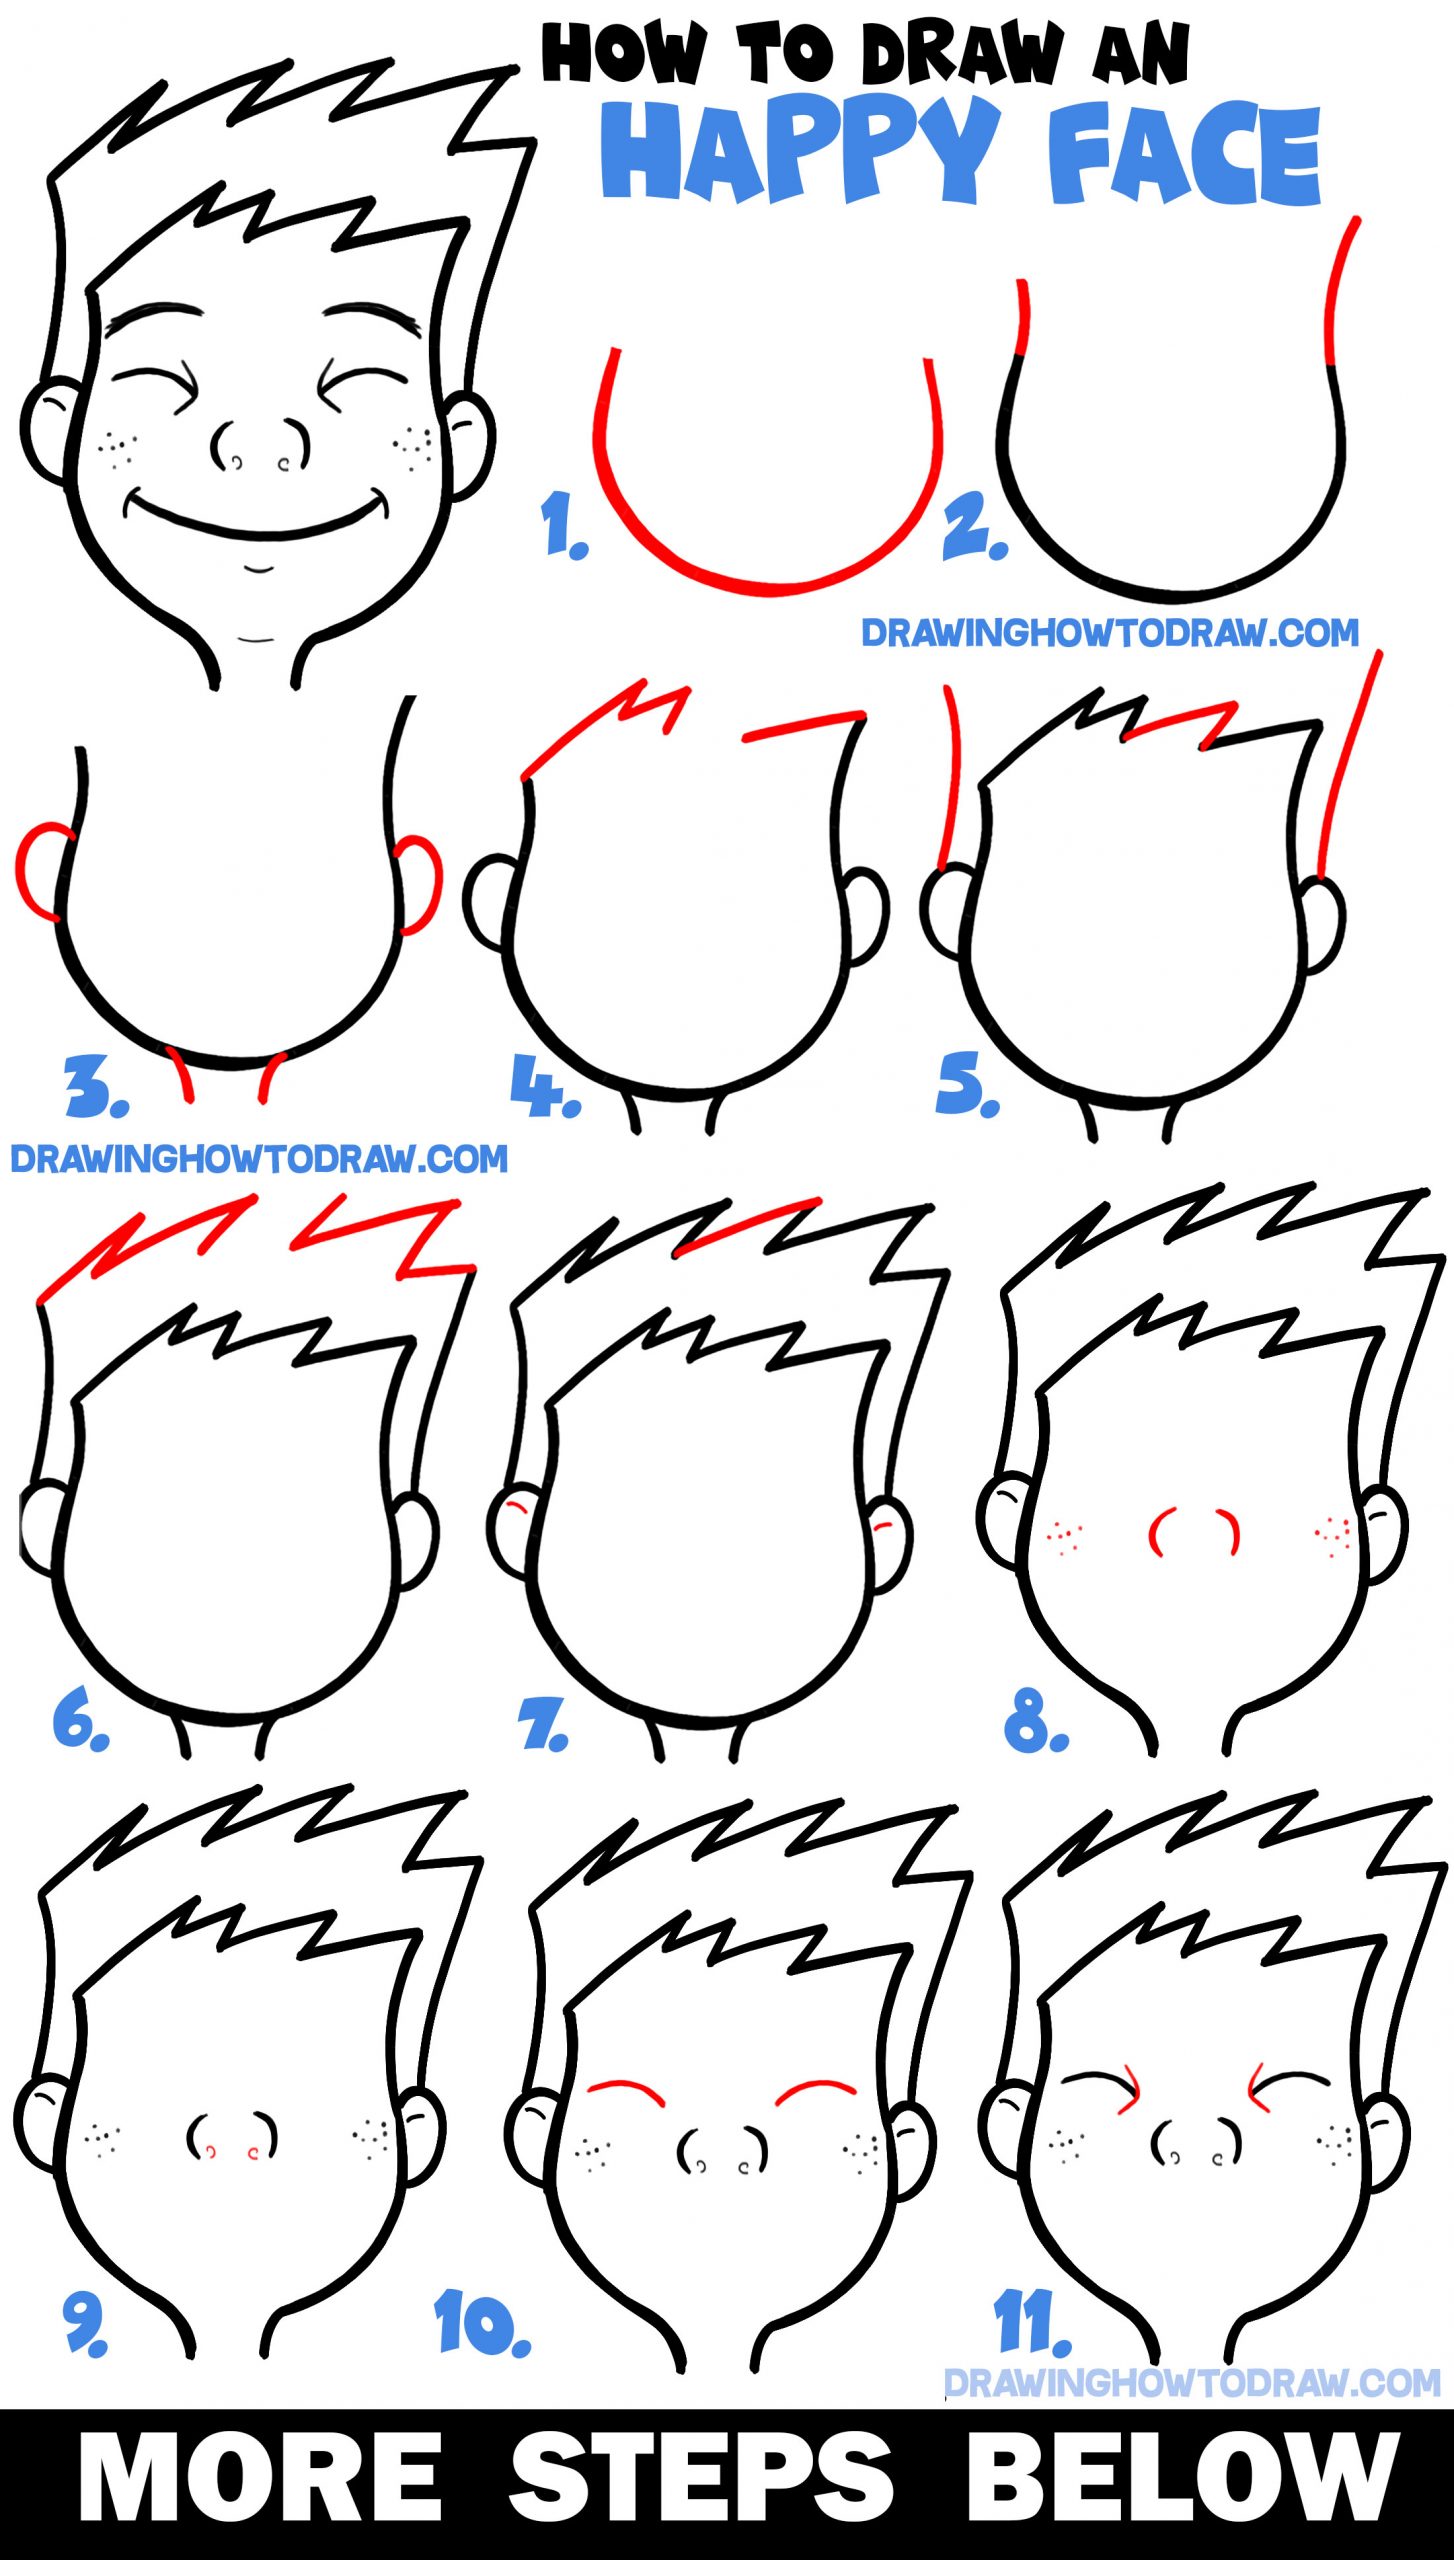 How to Draw Cartoon Facial Expressions : Happy, Smiling, Grinning Ear to  Ear - How to Draw Step by Step Drawing Tutorials